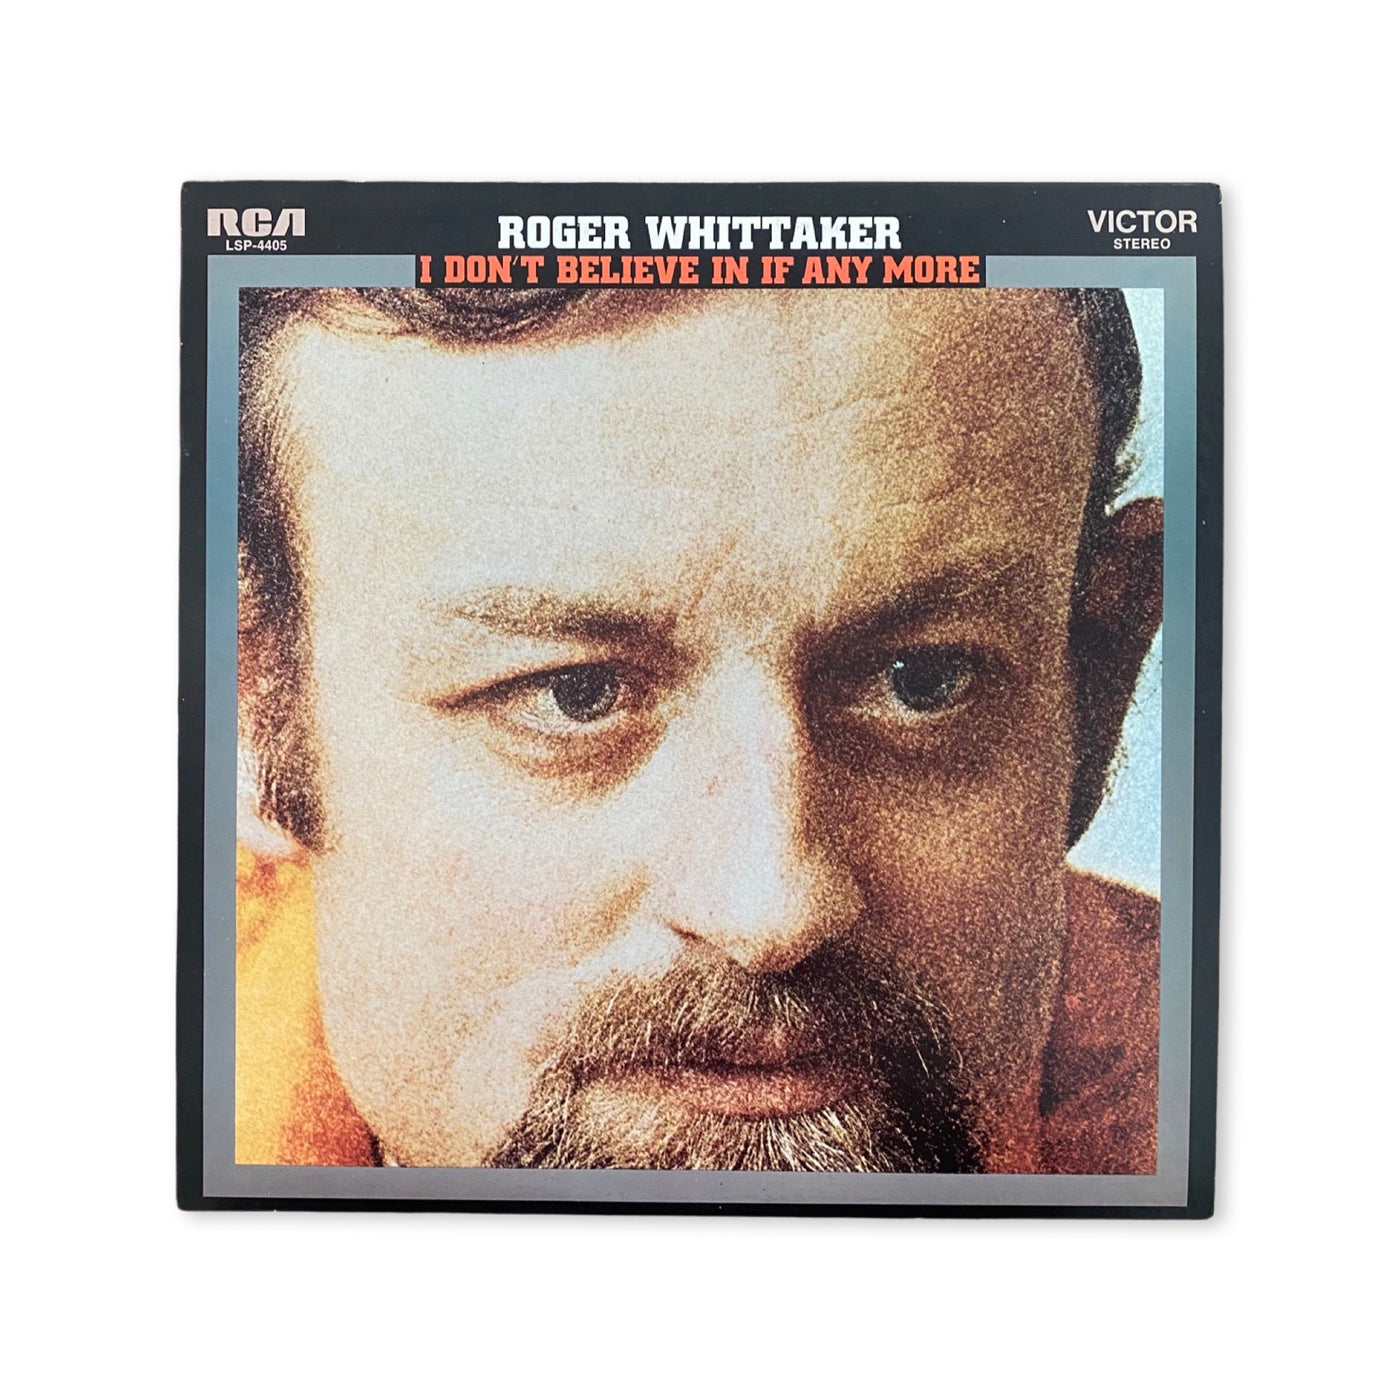 Roger Whittaker - I Don't Believe In If Any More